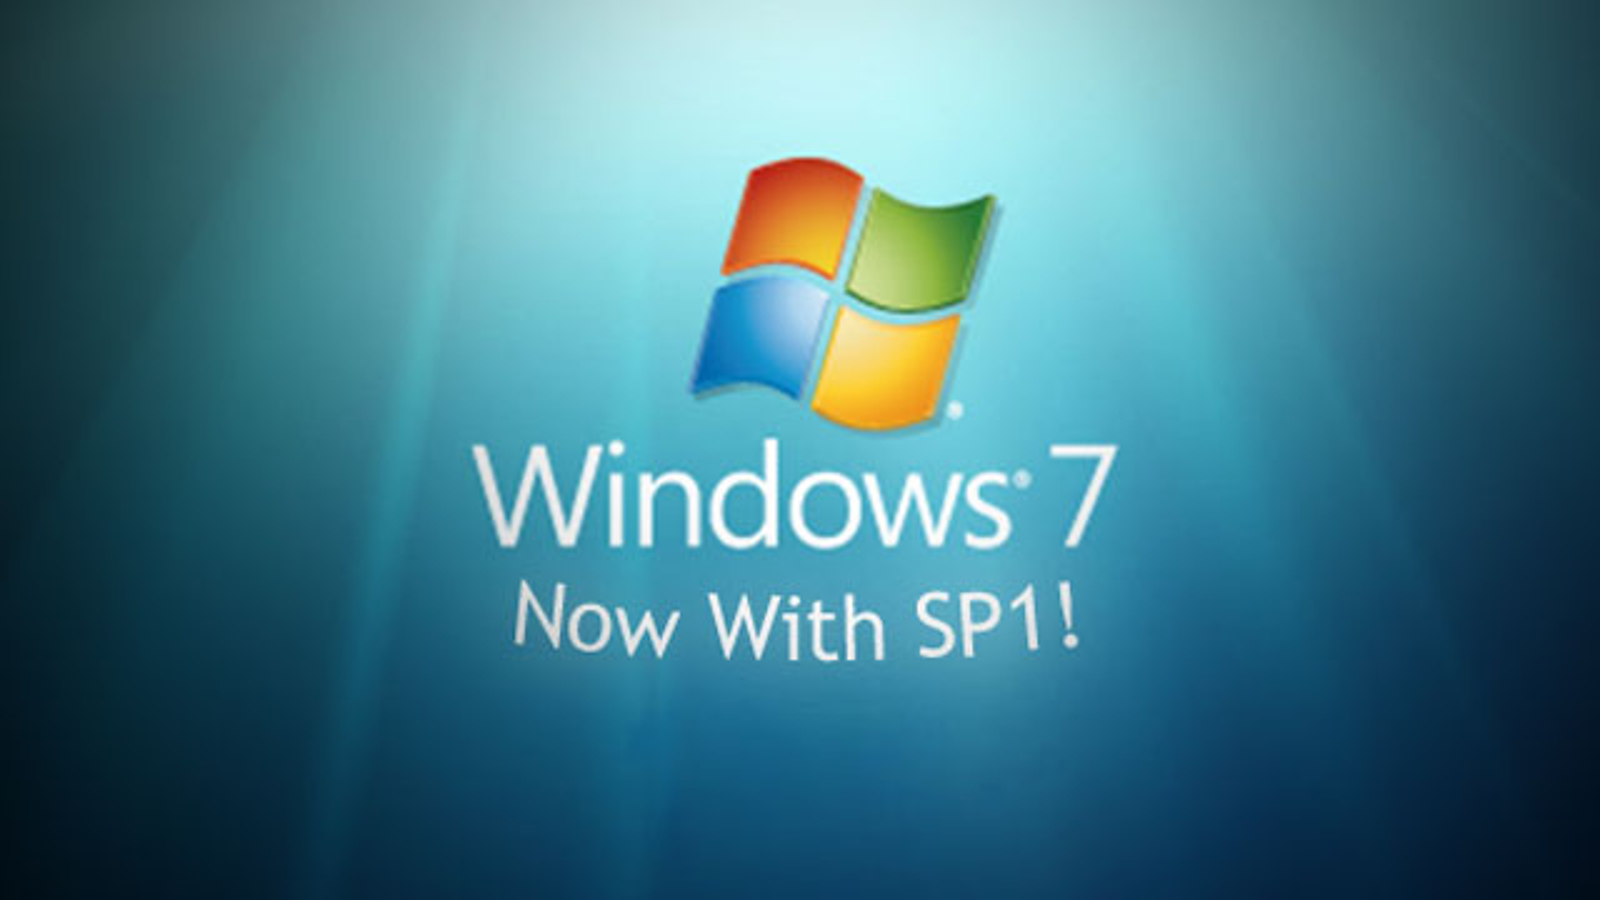 itunes download for windows 7 32 bit service pack 1